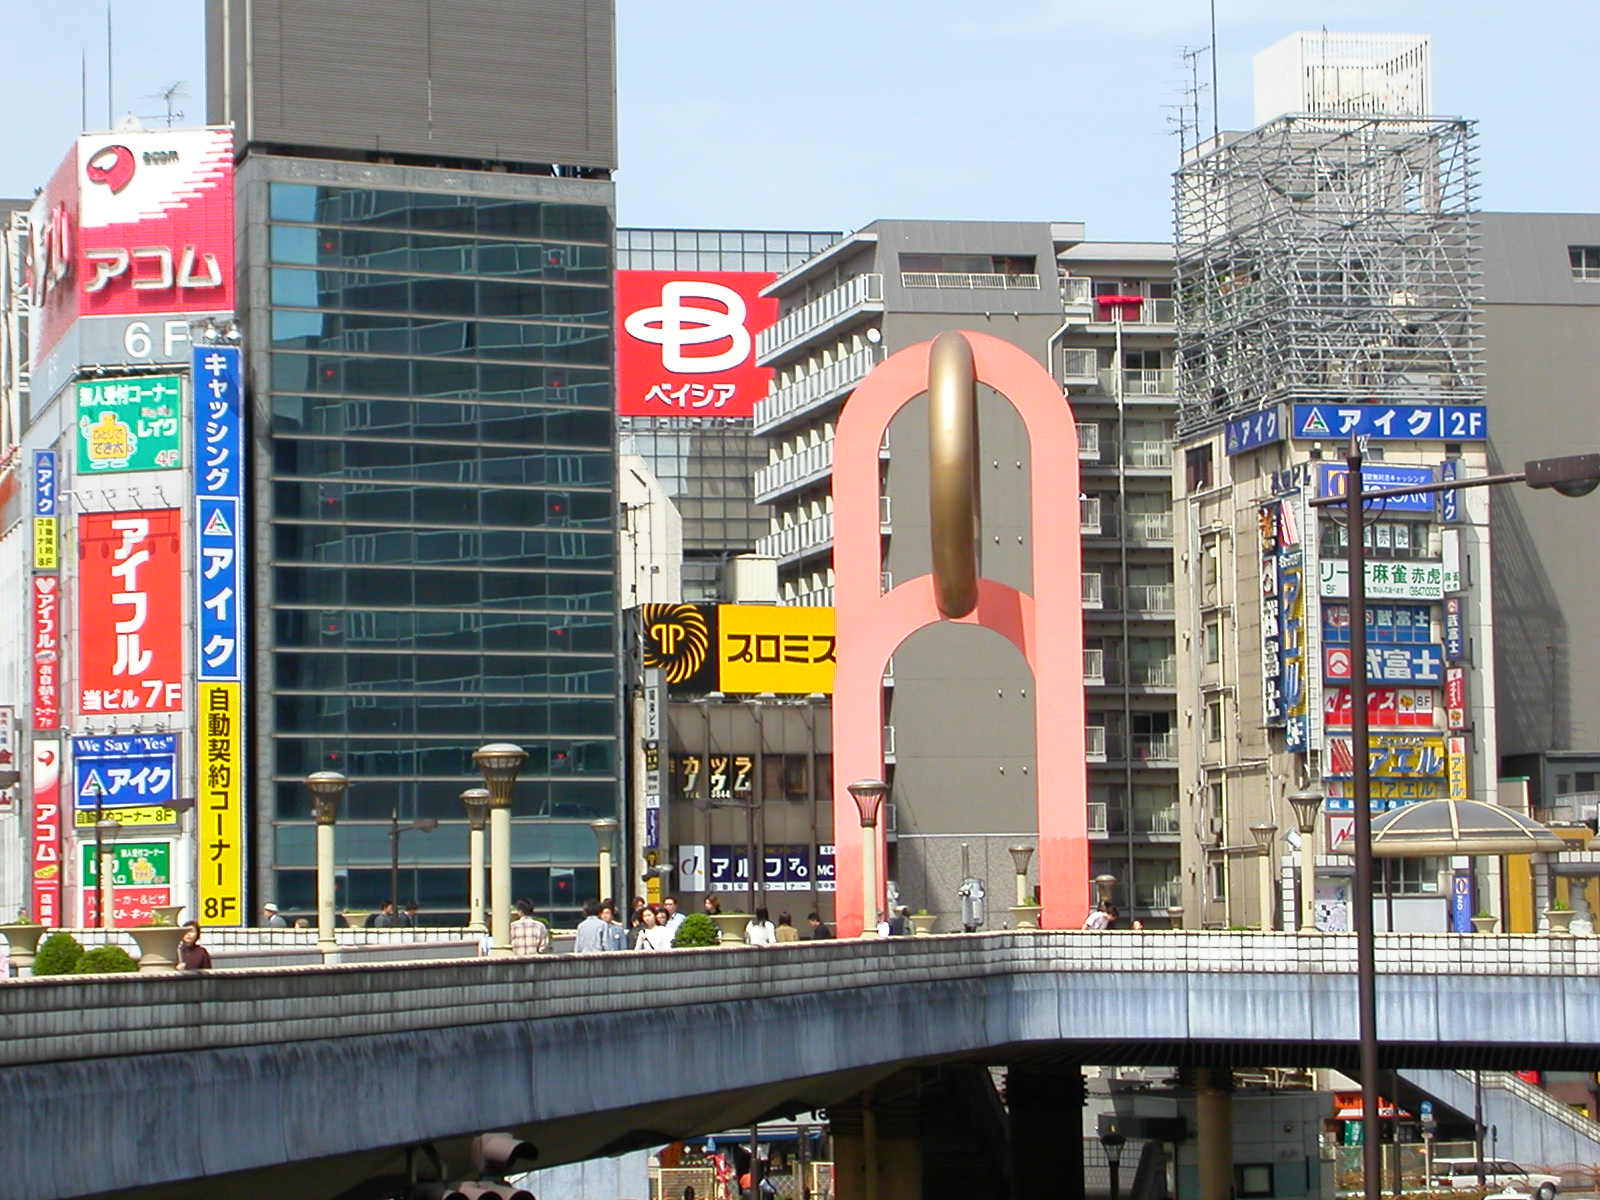 In front of Ueno Station is this walkway with civic works and distinctive Tokyo architecture